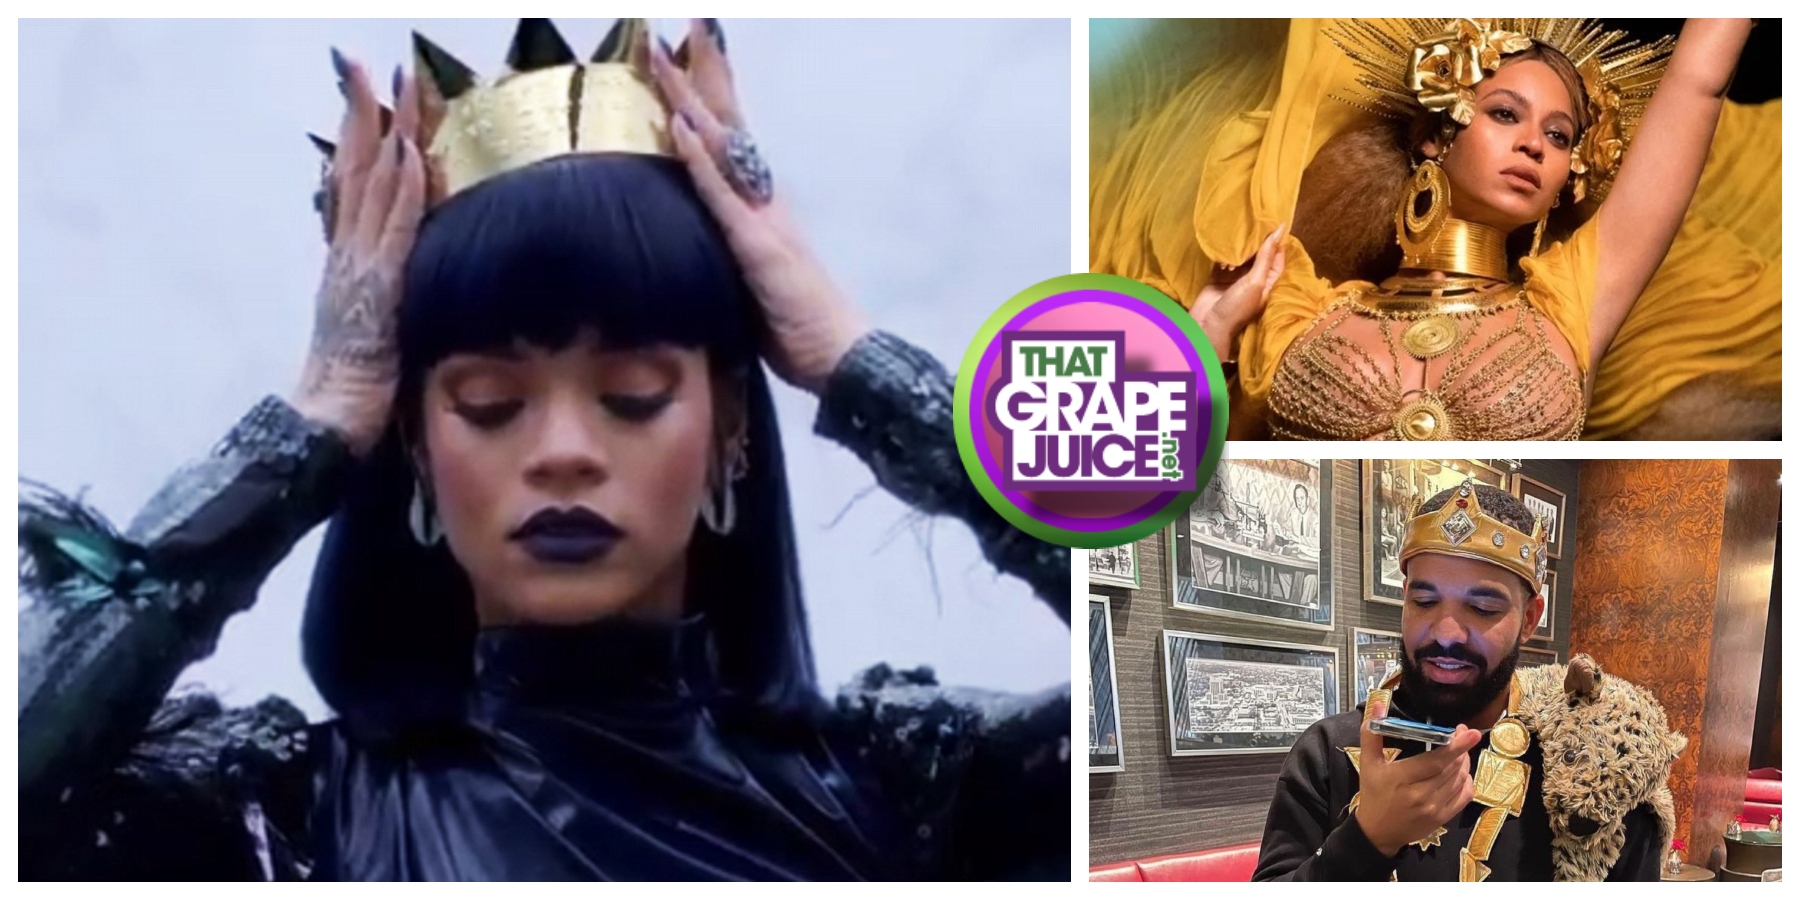 RIAA: Rihanna Breaks Tie With Beyonce For Most Platinum Hits Among Black Women / Blasts Past Drake With Most Overall Multi-Platinum Hits